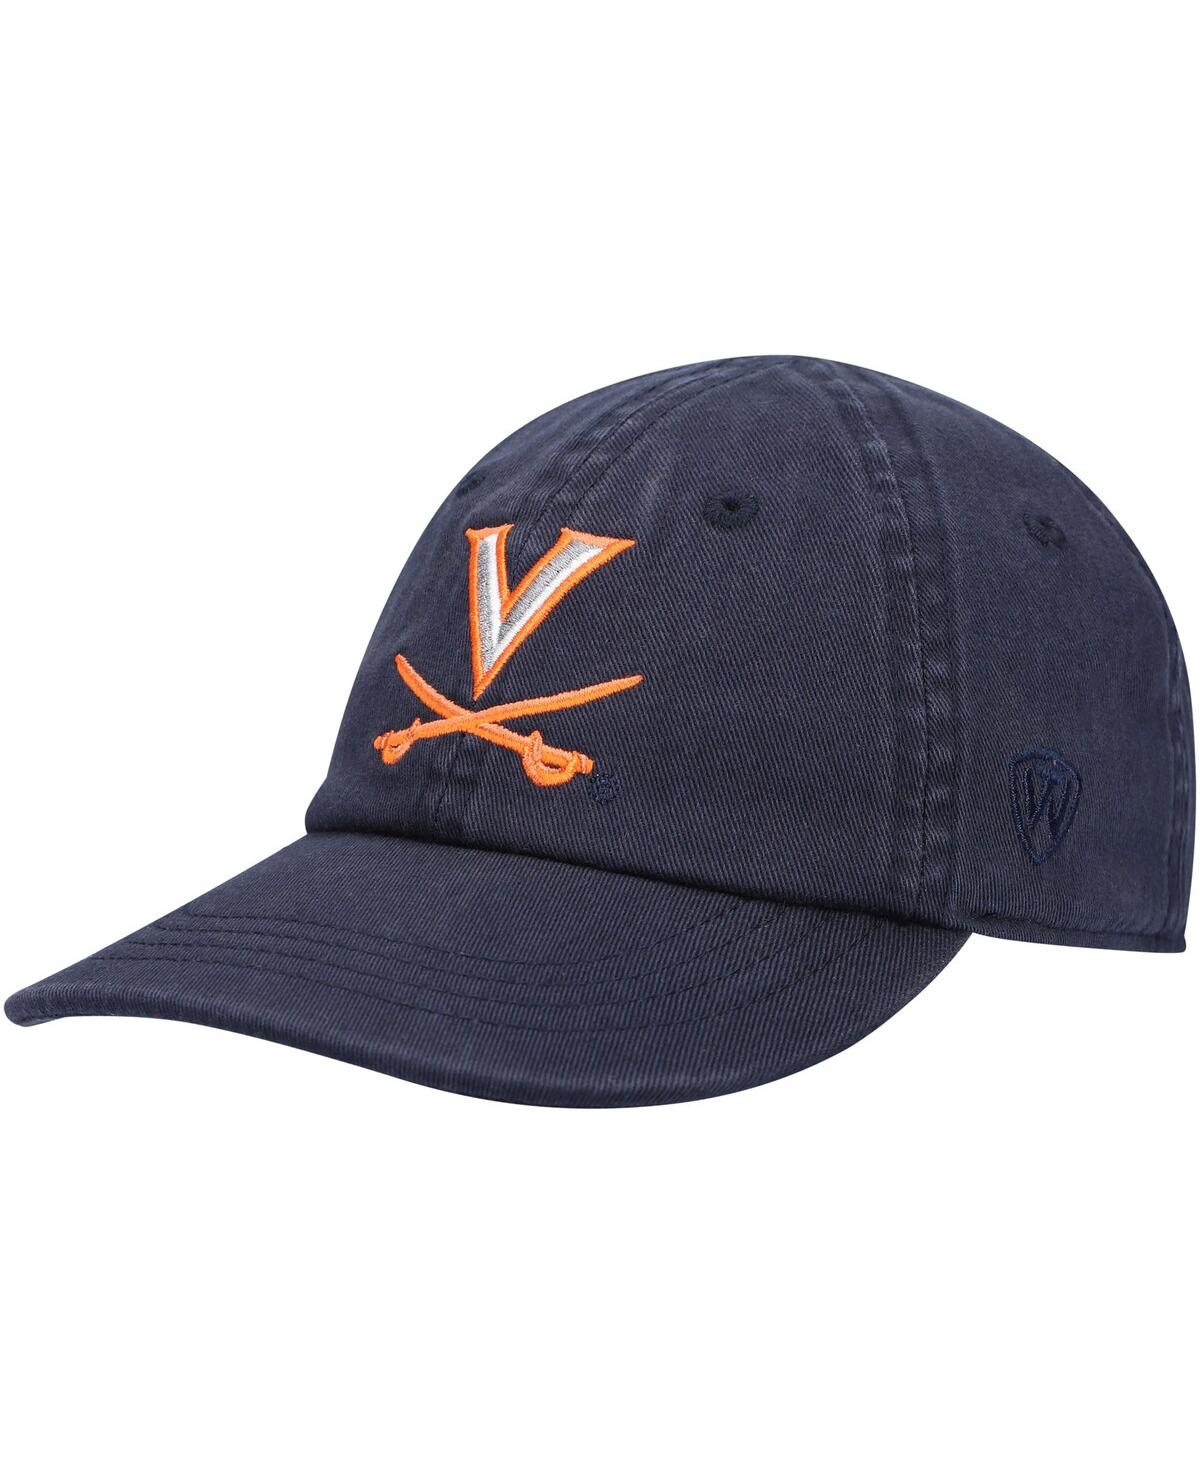 Shop Top Of The World Boys And Girls Infant  Navy Virginia Cavaliers Mini Me Team Adjustable Hat